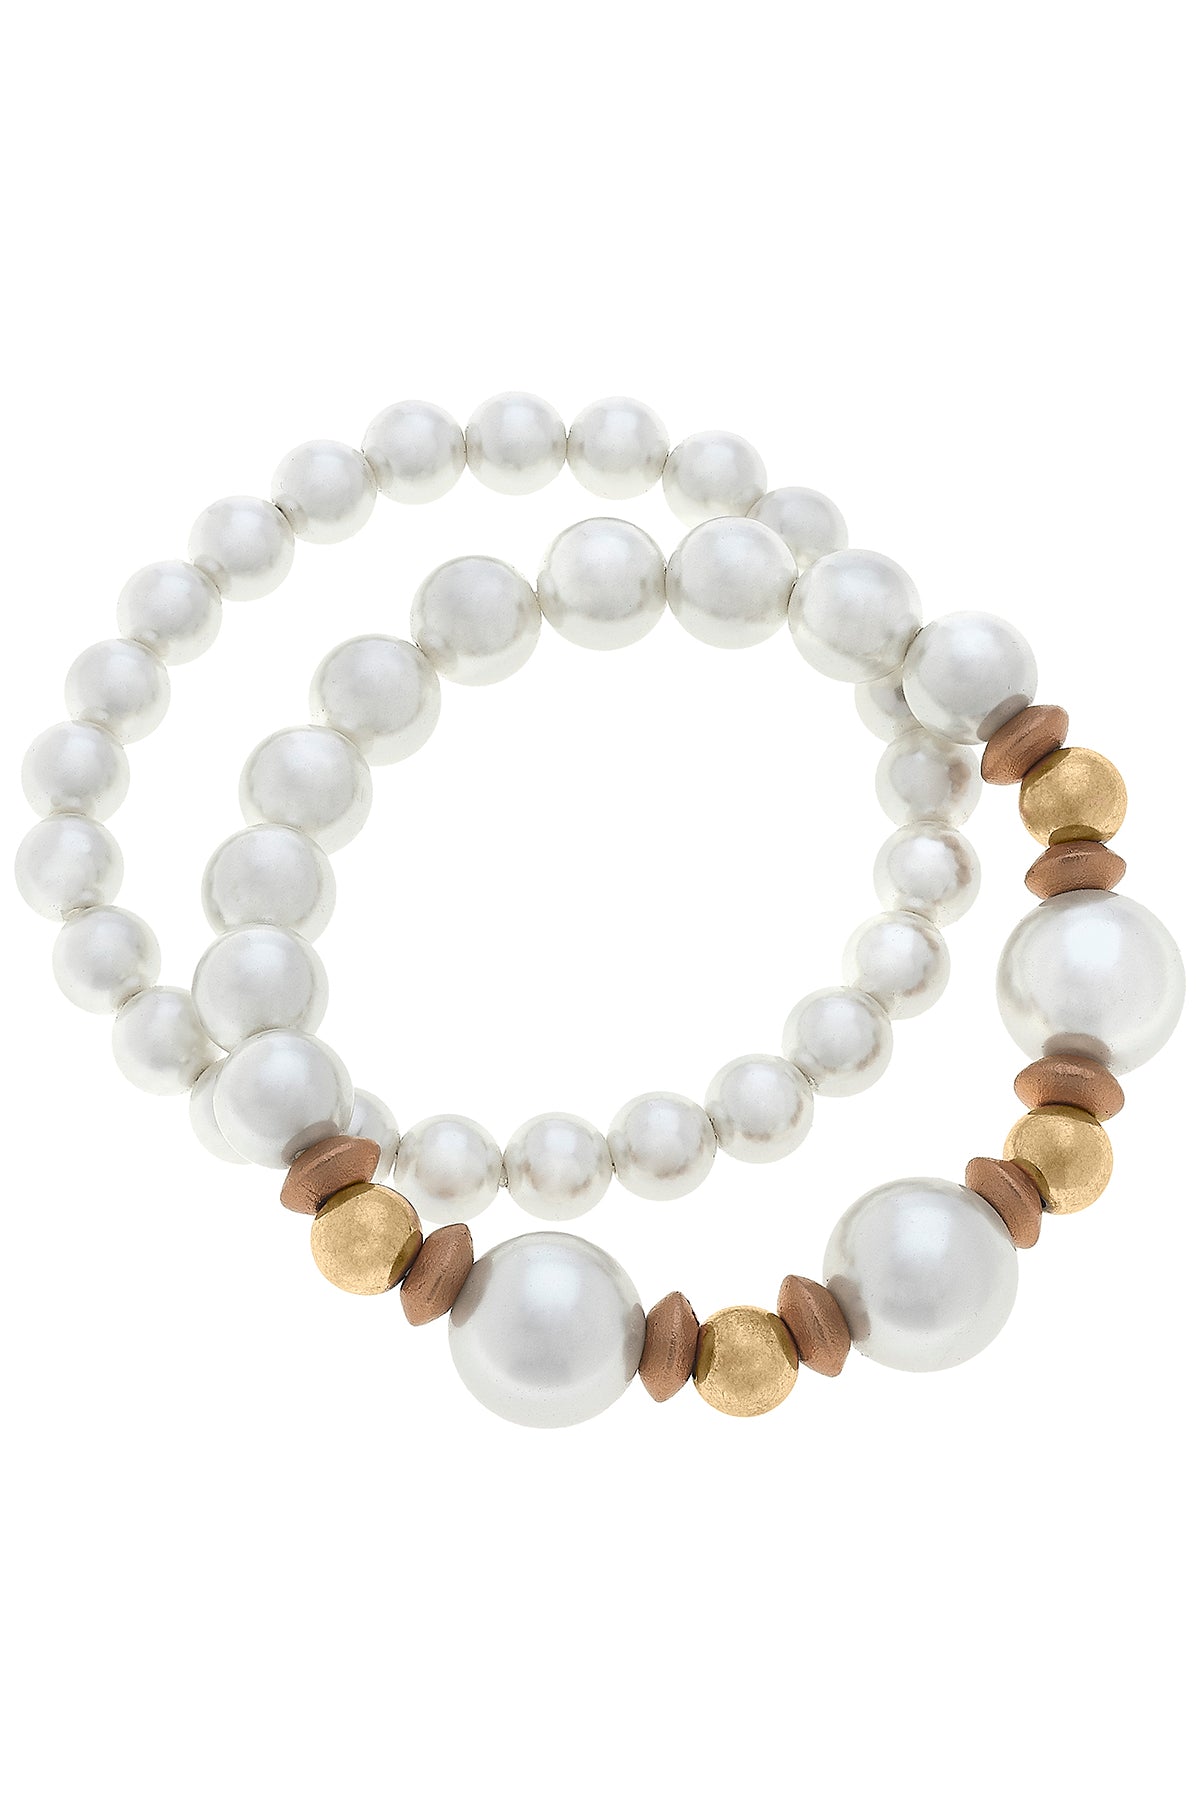 Moira Pearl, Wood & Gold Bead Stretch Bracelet Stack  in Ivory - Set of 2